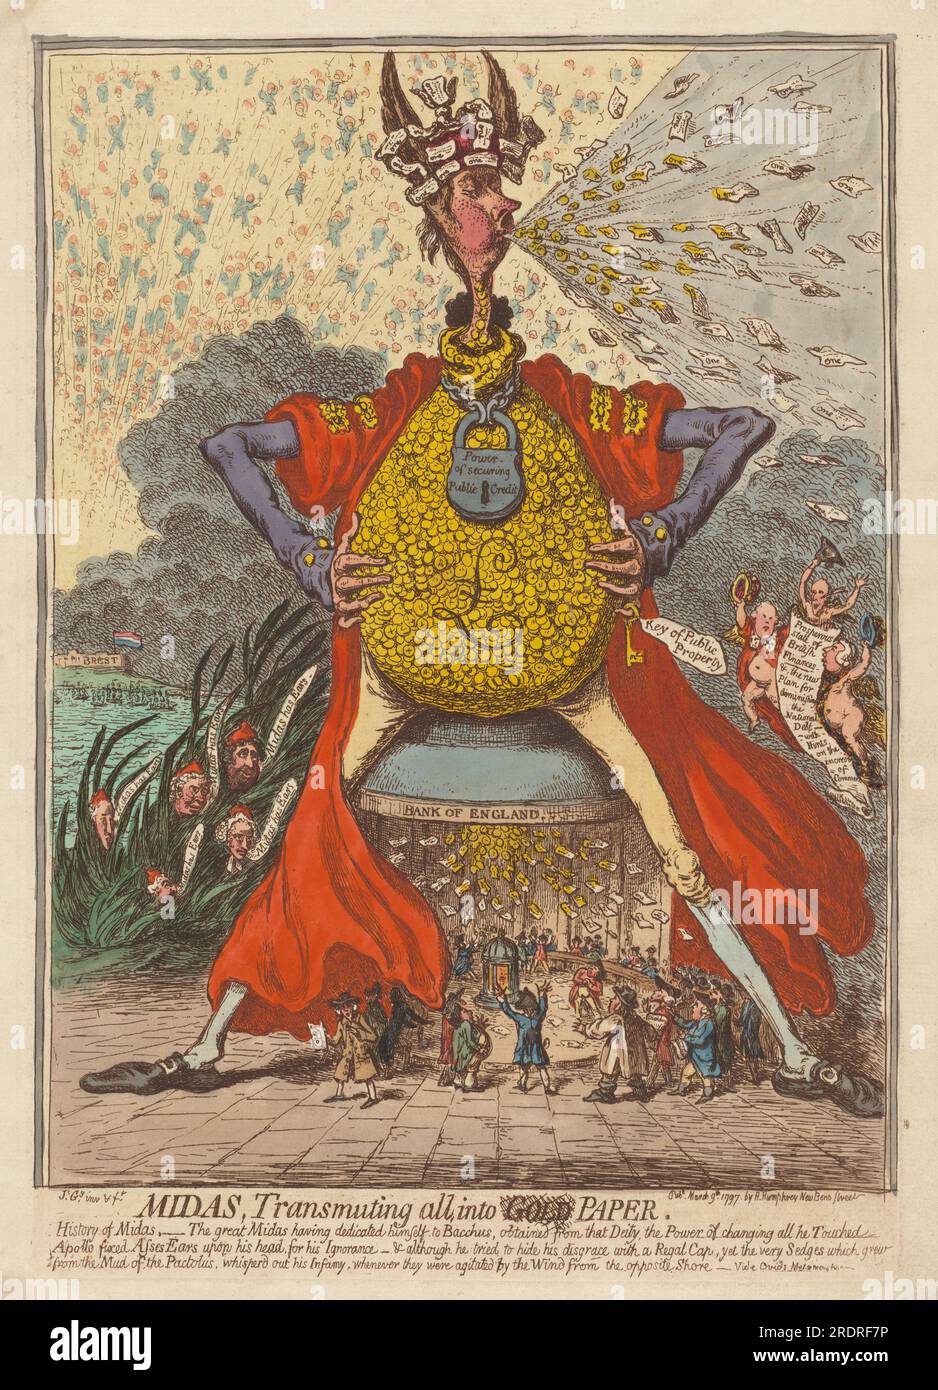 'James Gillray, Midas, Transmuting All into Paper, 1797, etching with publisher's hand-coloring in watercolor on laid paper, plate: 35.3 × 24.8 cm (13 7/8 × 9 3/4 in.) sheet: 40.8 × 29 cm (16 1/16 × 11 7/16 in.), Purchased as an Anonymous Gift, 2015.49.1' Stock Photo